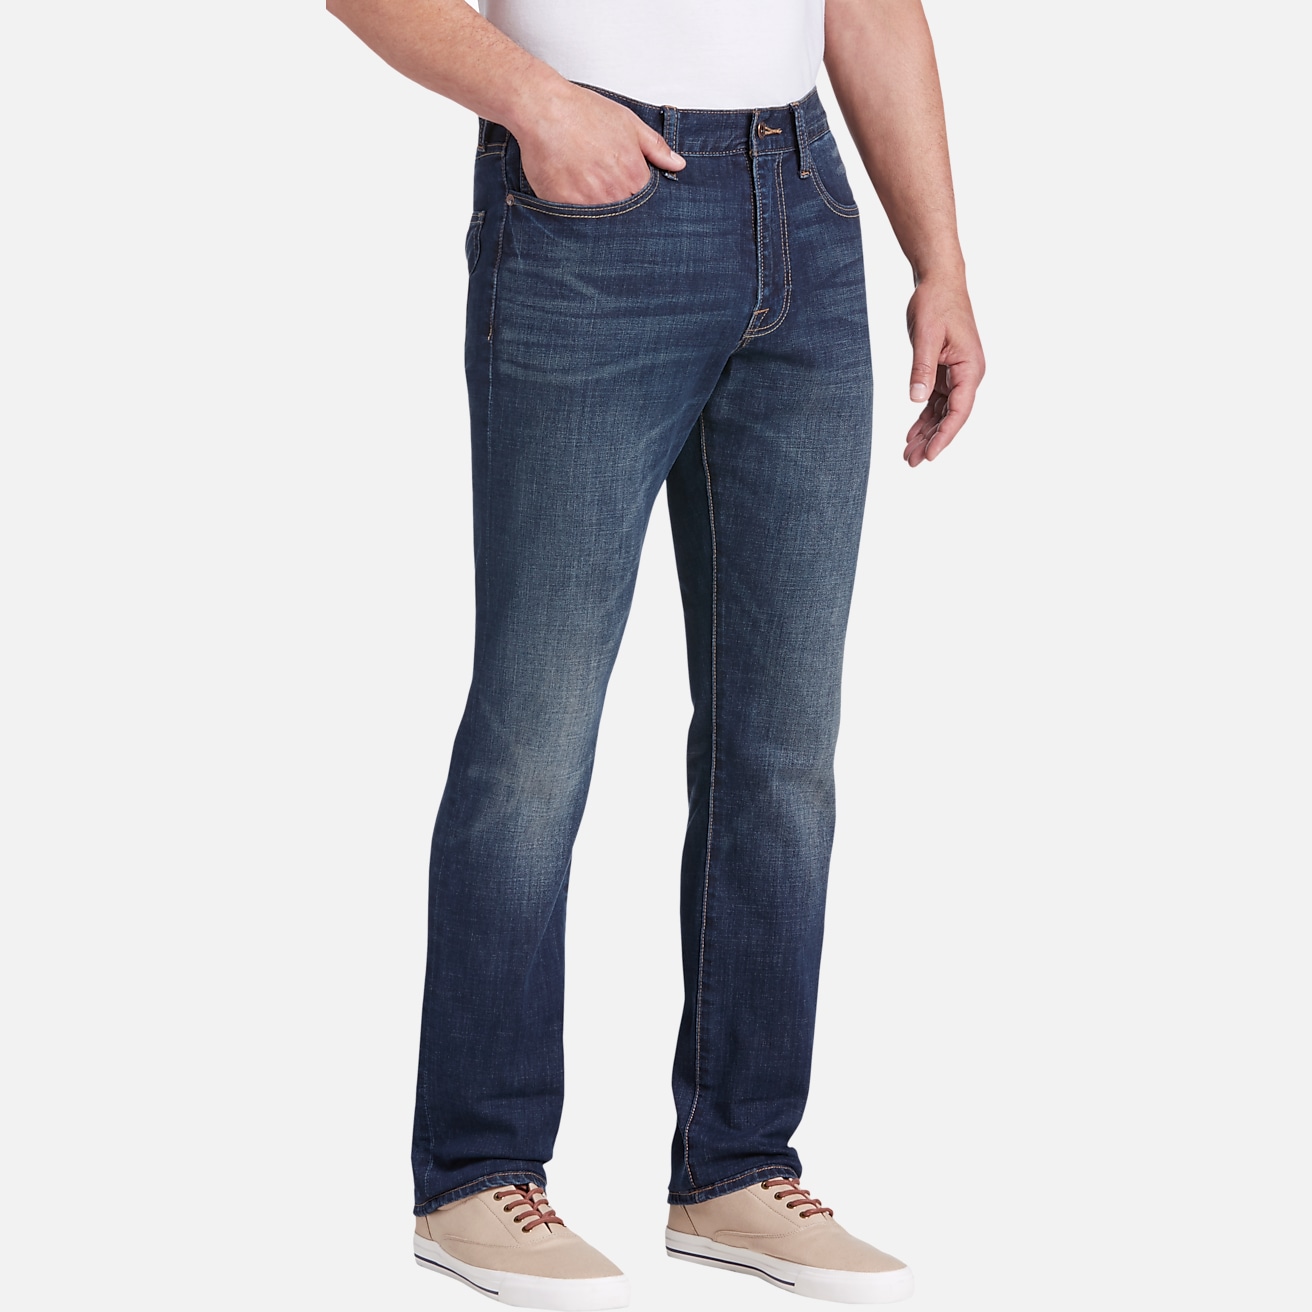 Lucky Brand 410 Athletic Fit Jeans, Dark Wash